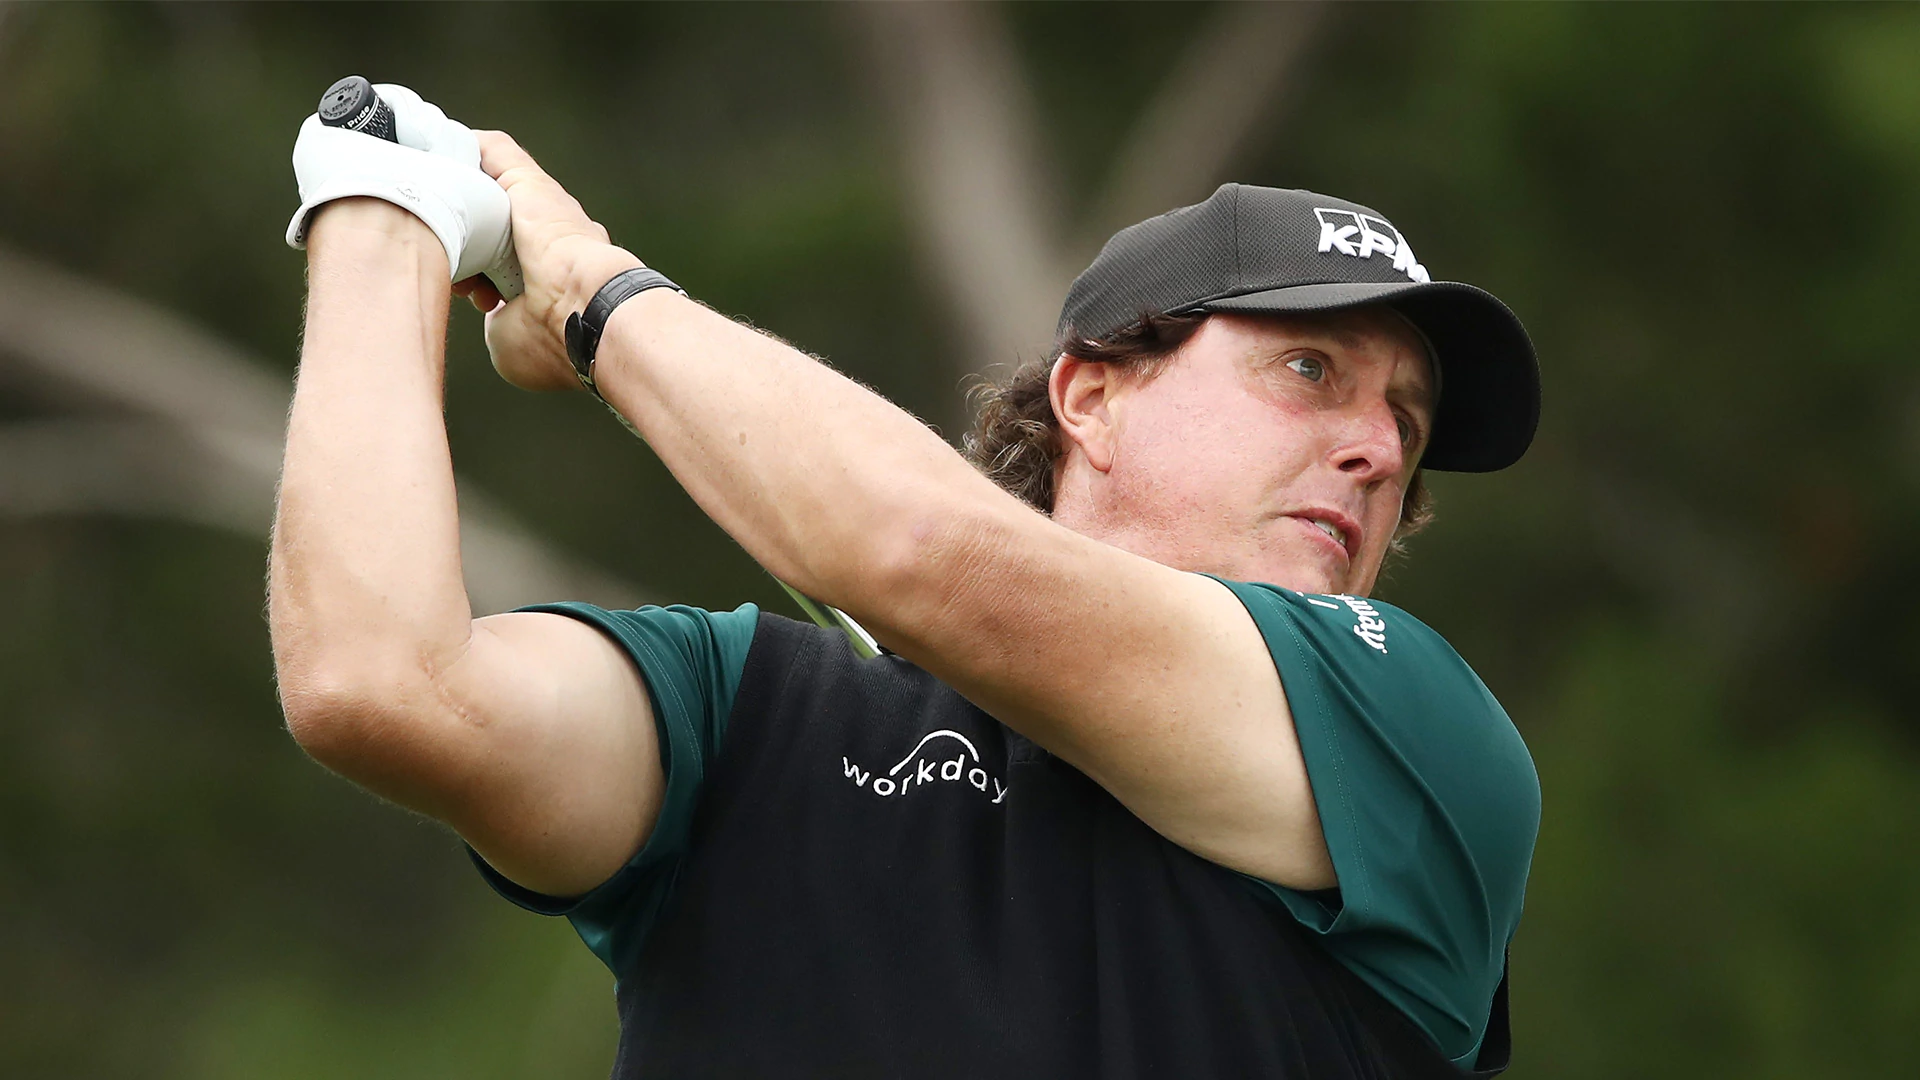 Following early Match Play exit, Mickelson heading straight to Augusta